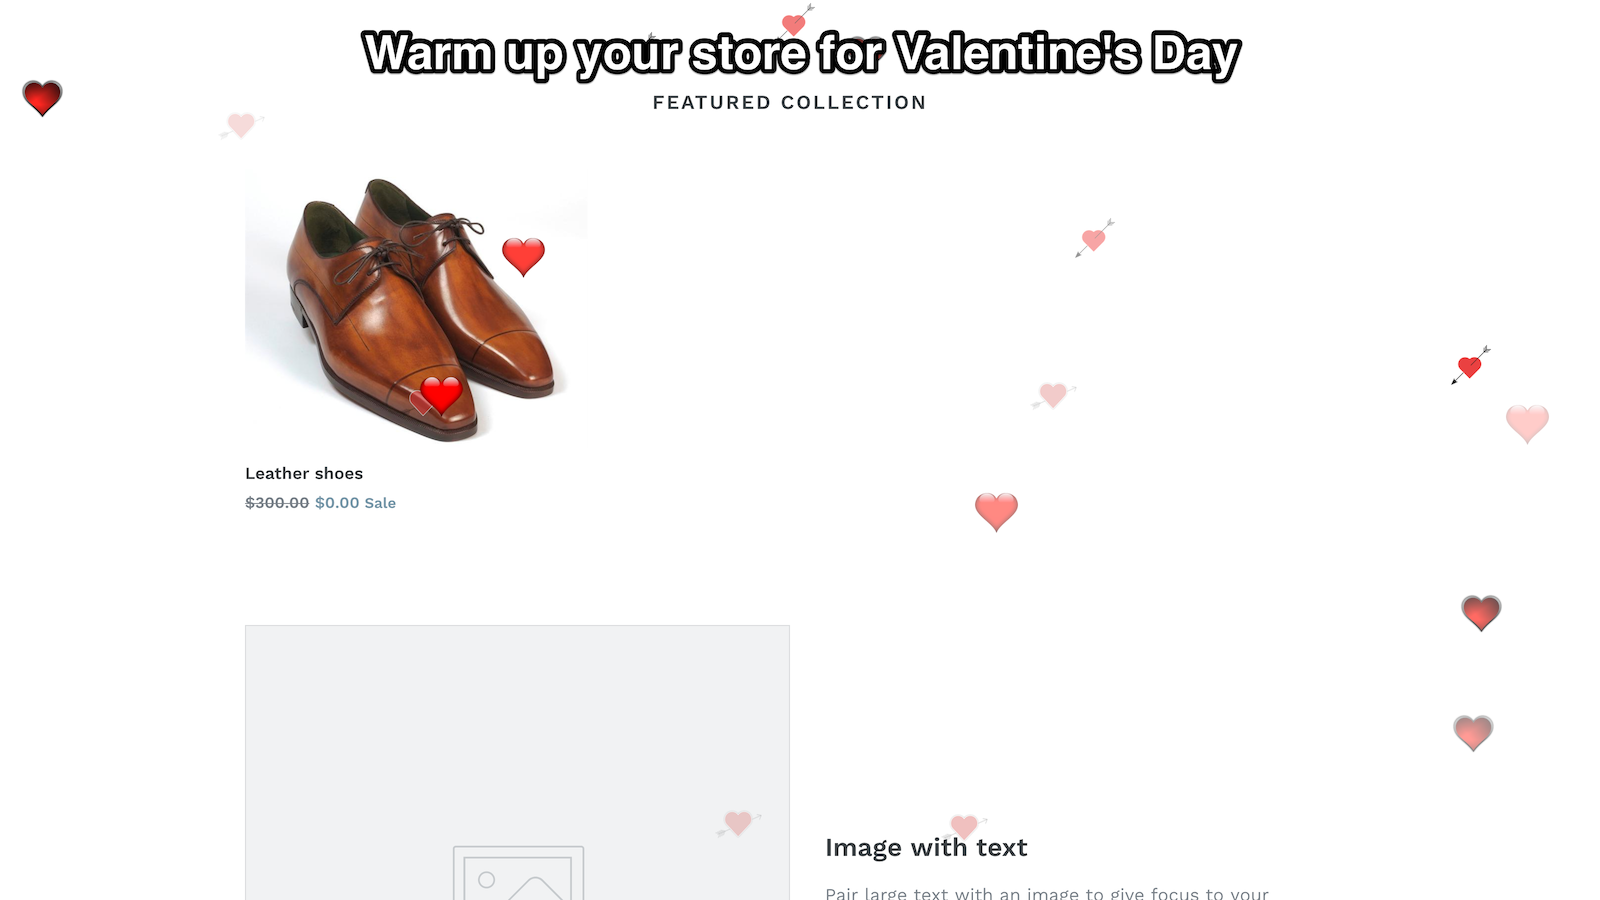 Warm up your store for Valentine's Day